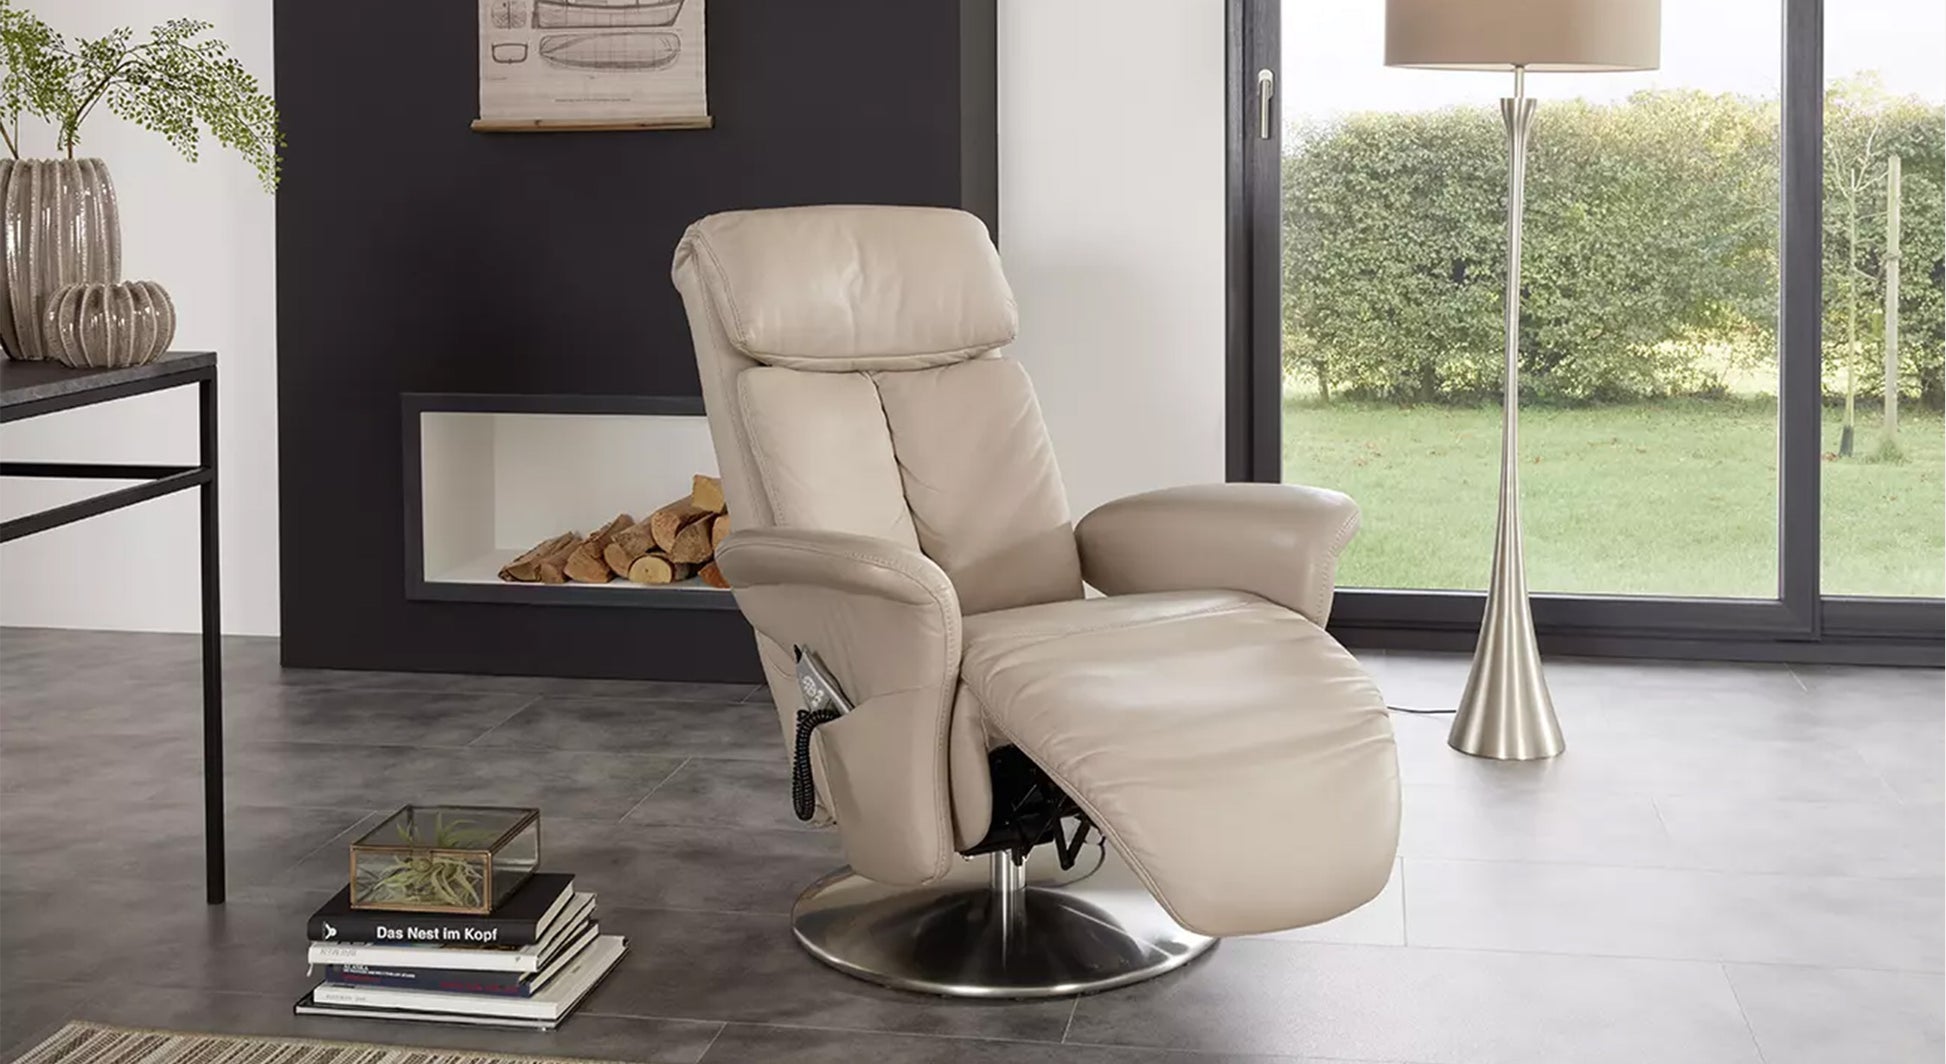 Fauteuil Relax 7418 Easy Swing massage +50 tissus & cuirs au choix